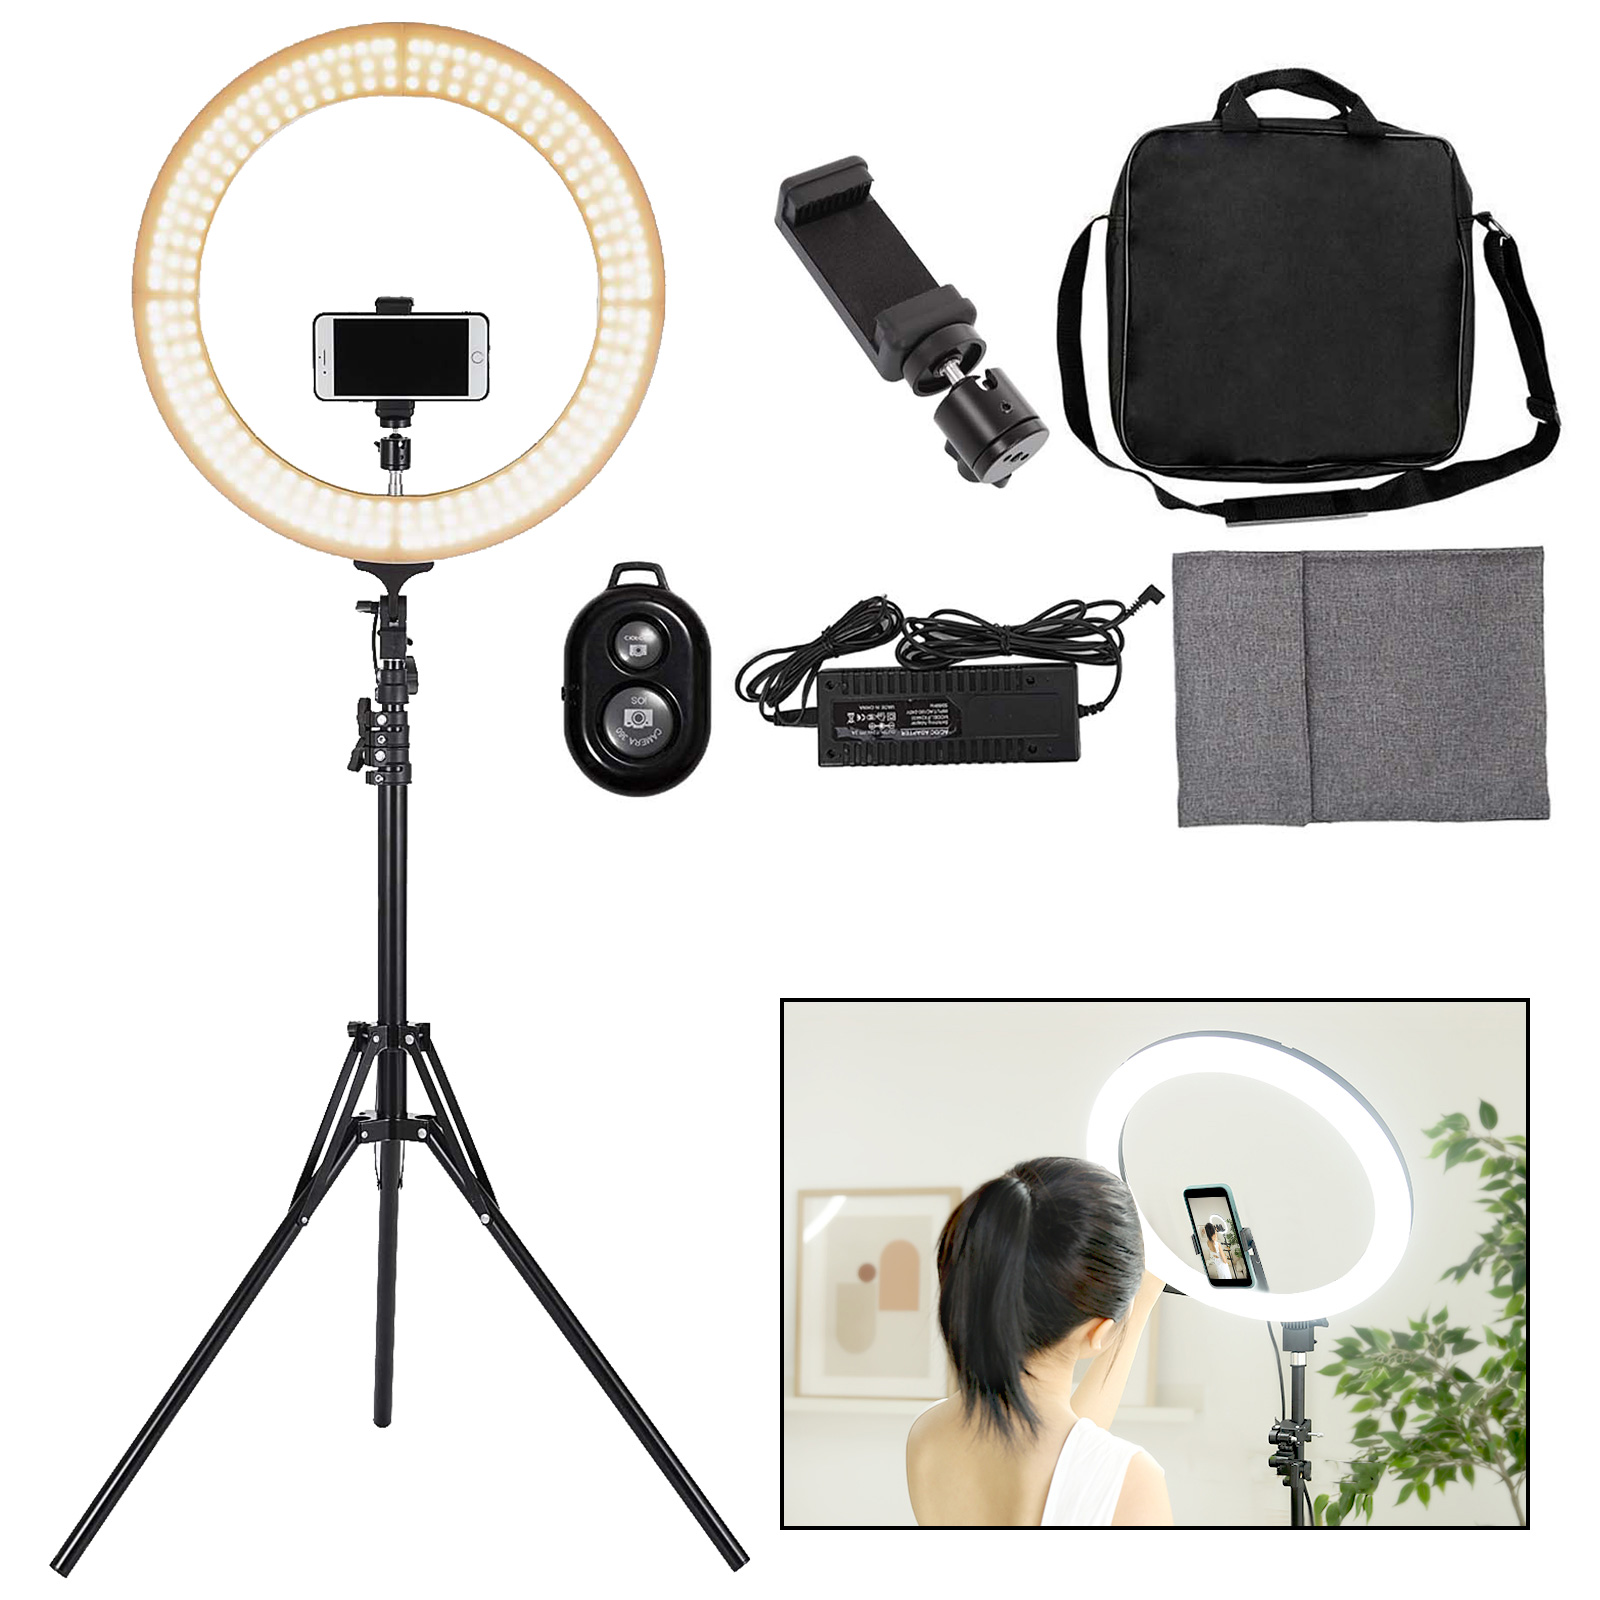 19" LED Ring Light w/ Stand Dimmable 2700-5500K Lighting Kit Photo Video Makeup от Vevor Many GEOs